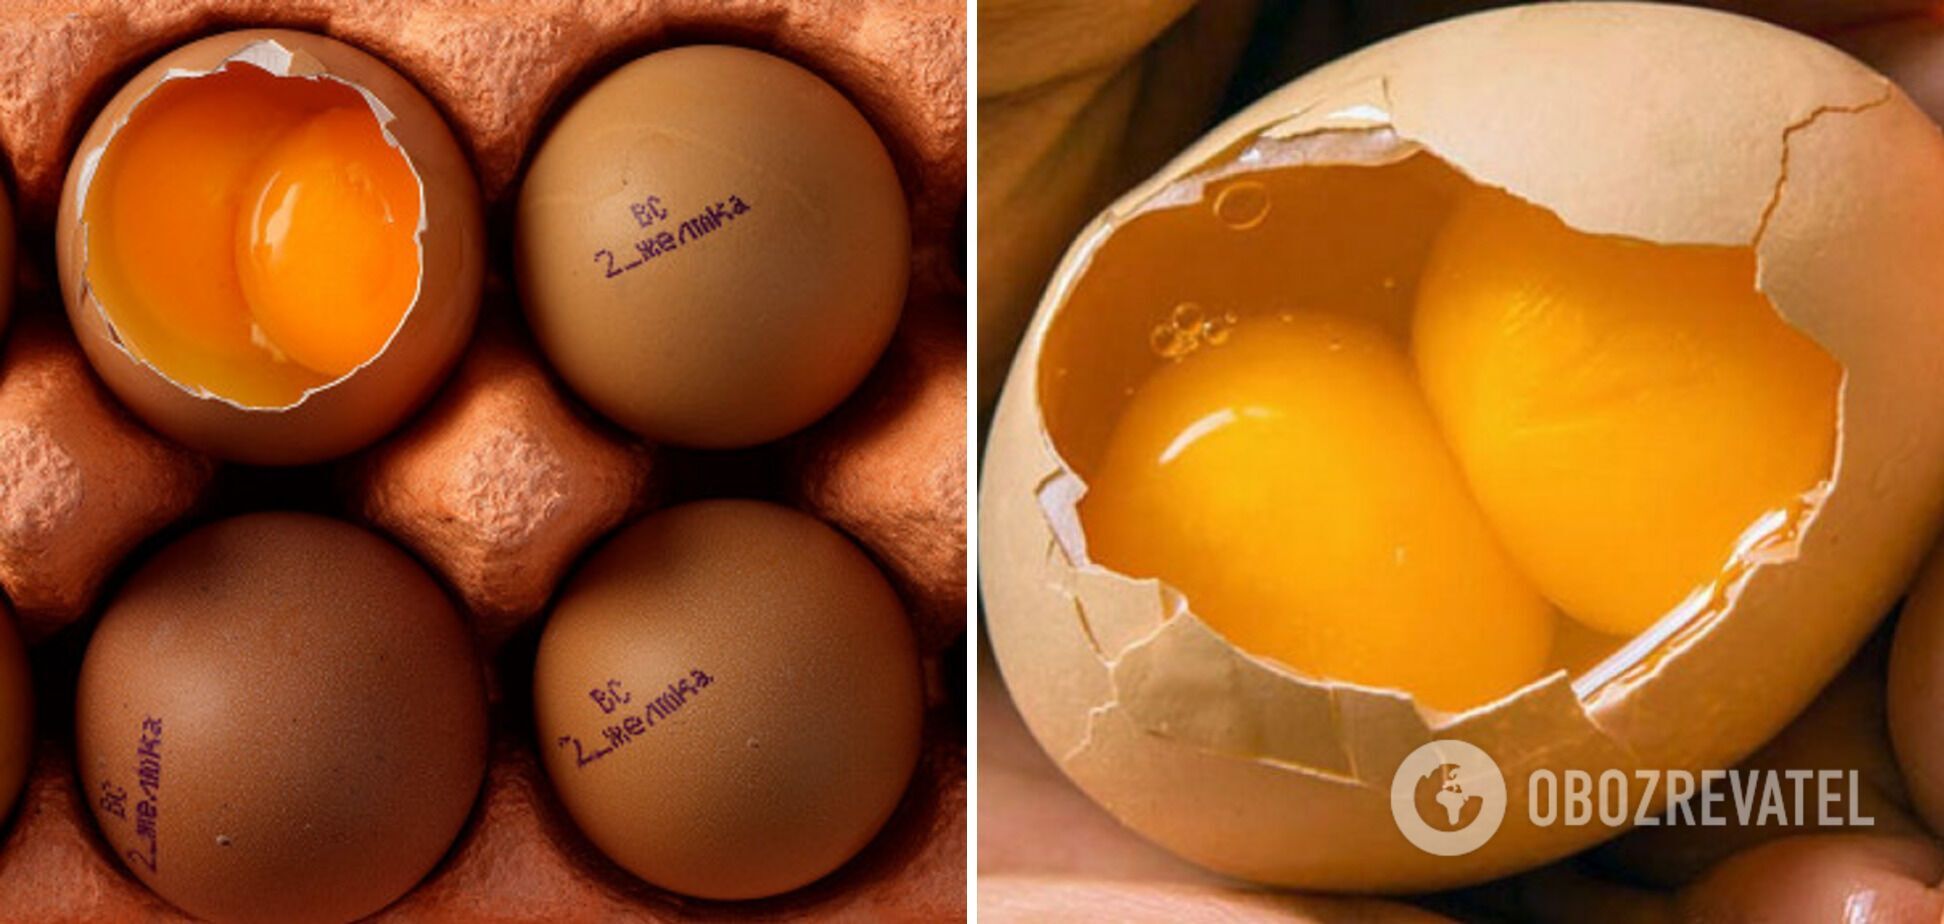 What are the benefits of chicken eggs